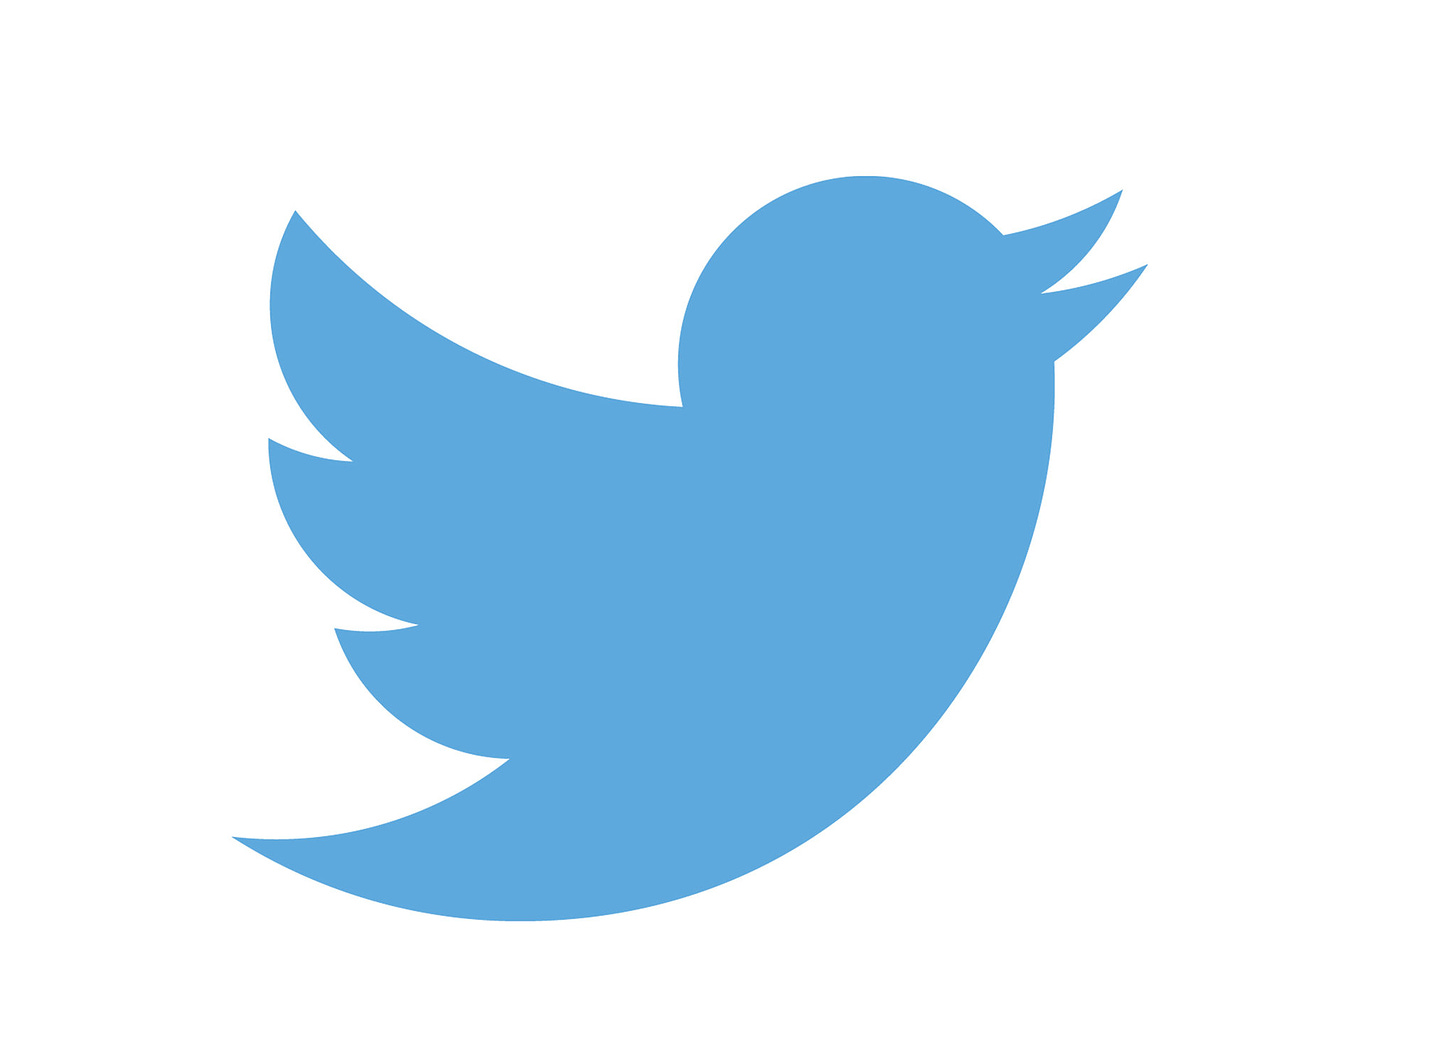 Who Made That Twitter Bird? - The New York Times